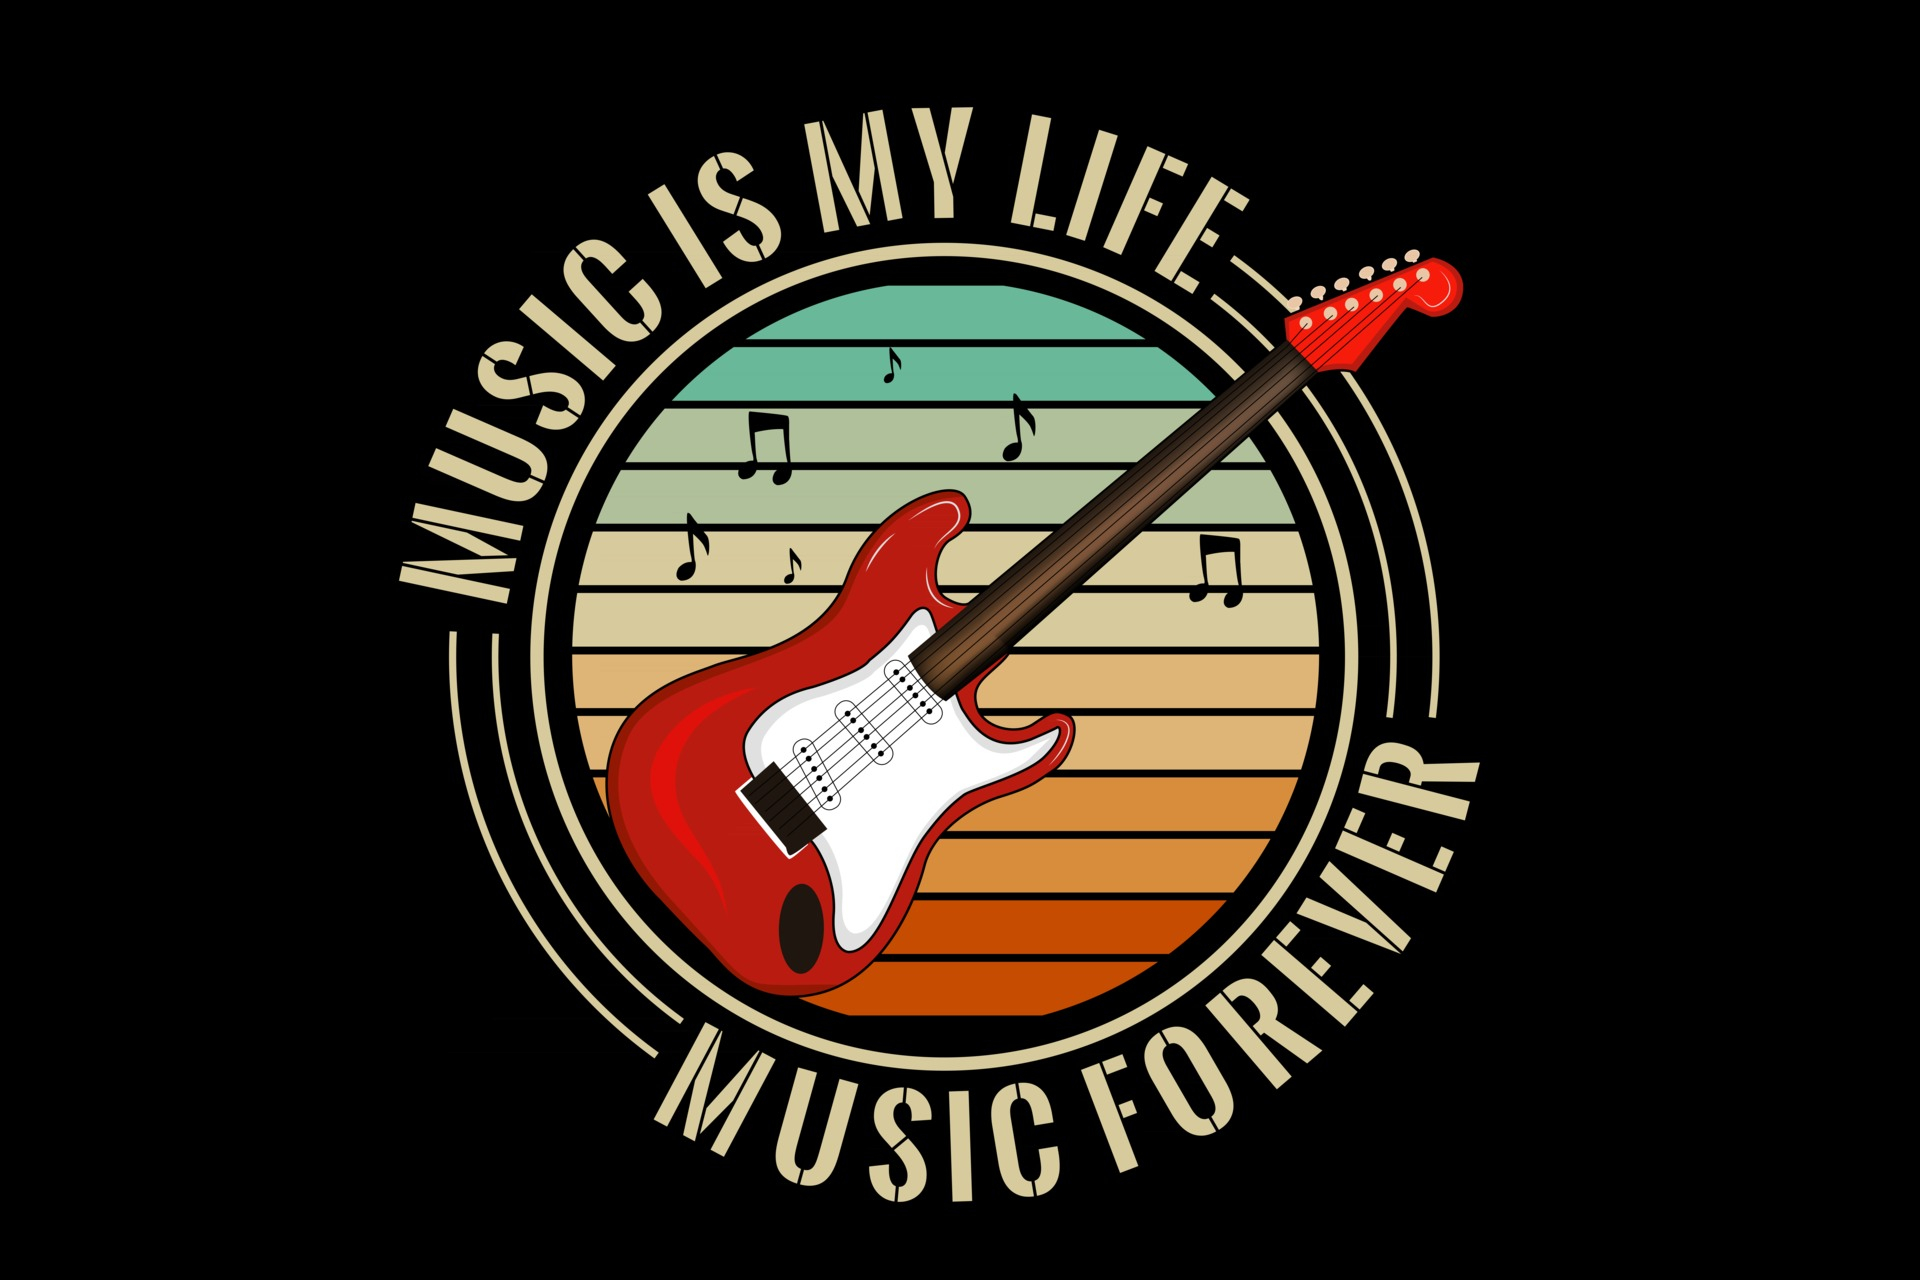 1920x1280 music is my life silhouette design with retro background 2786968 Vector Art